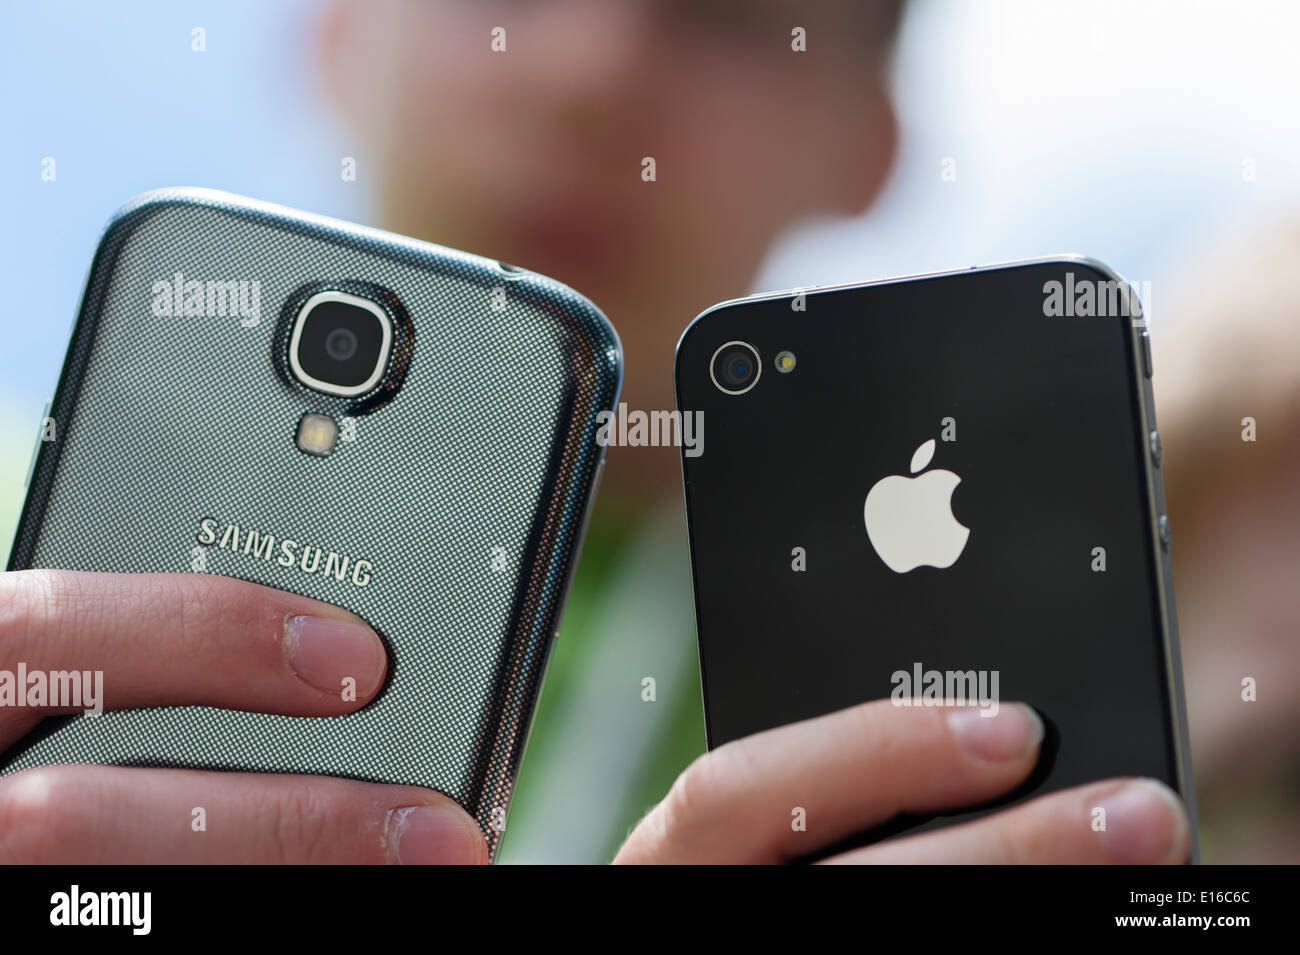 Two teenagers are posing with their Samsung Galaxy S4 (left) and iPhone 4 smartphones. Stock Photo